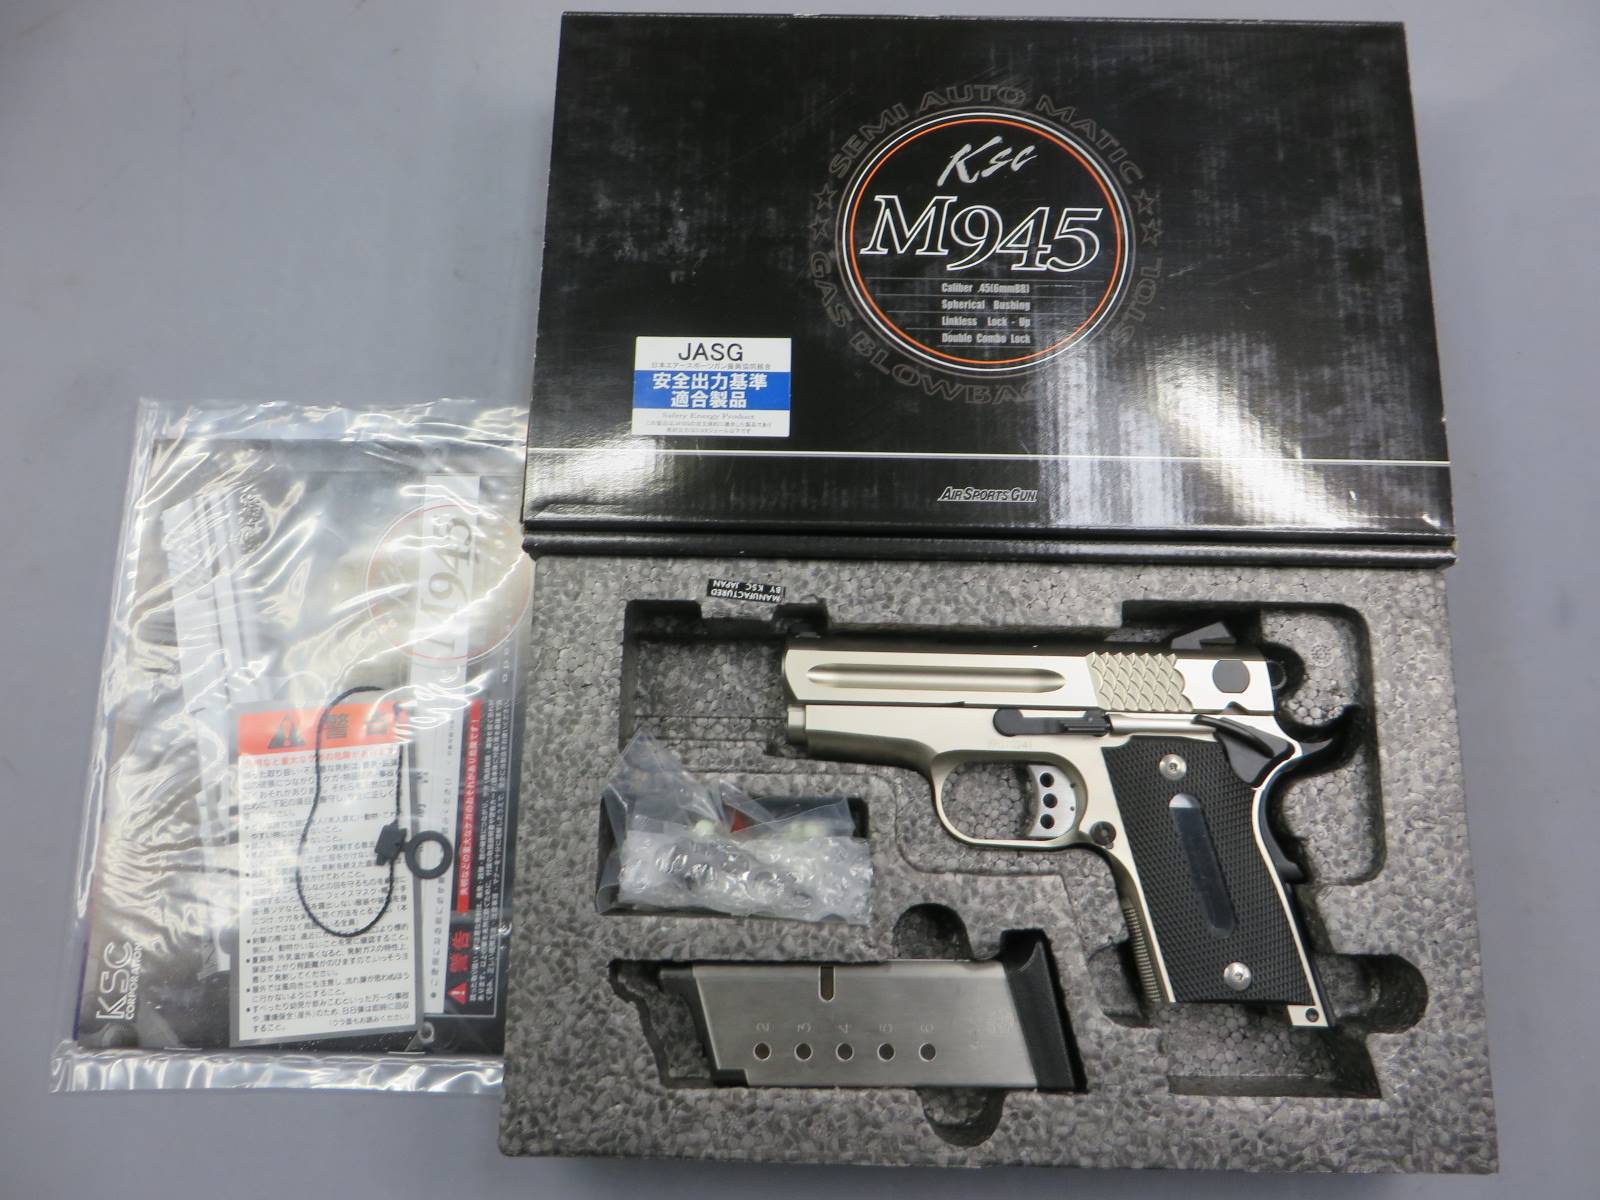 【KSC】M945 コンパクト スパイダー 限定品